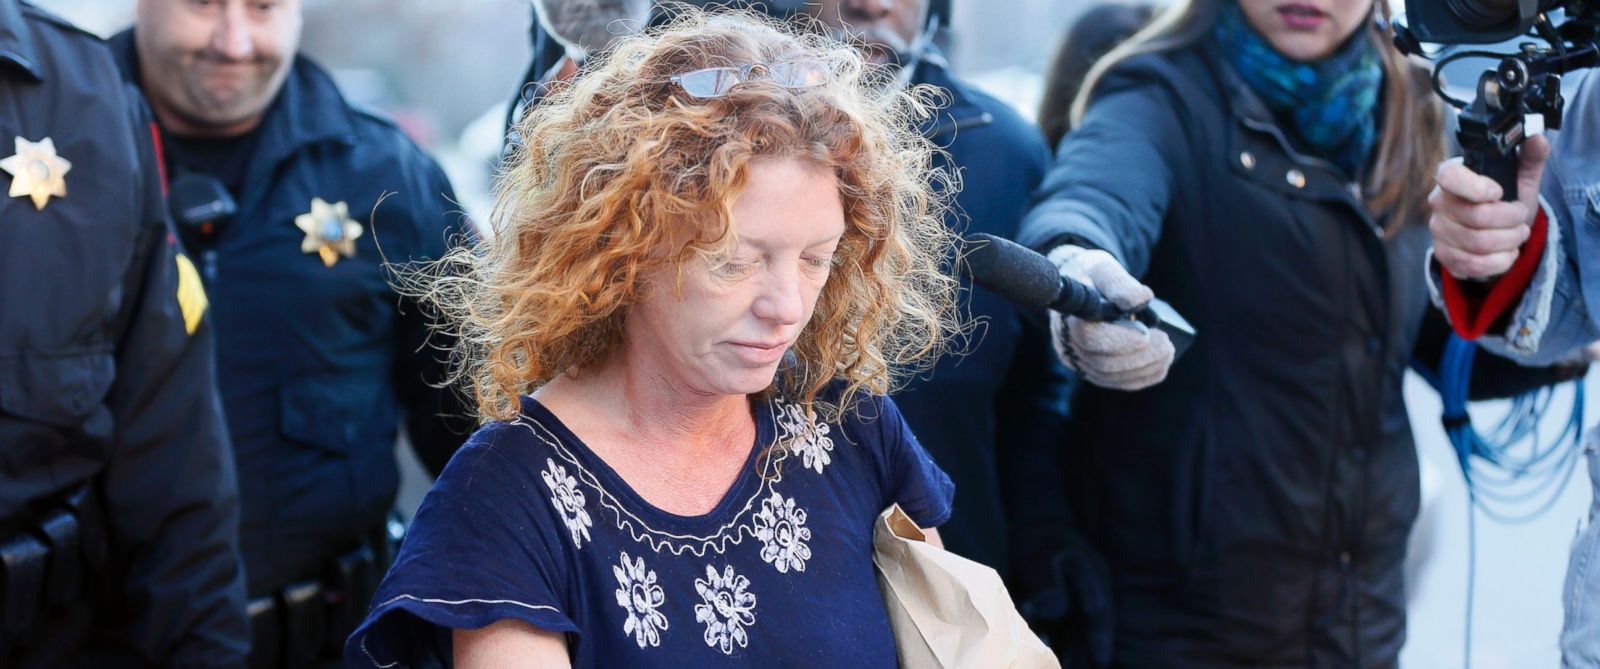 PHOTO: Tonya Couch, the mother of a Texas teen who used an "affluenza" defense in a drunken wreck, leaves Tarrant County Jail, Jan. 12, 2016, in Fort Worth, Texas.